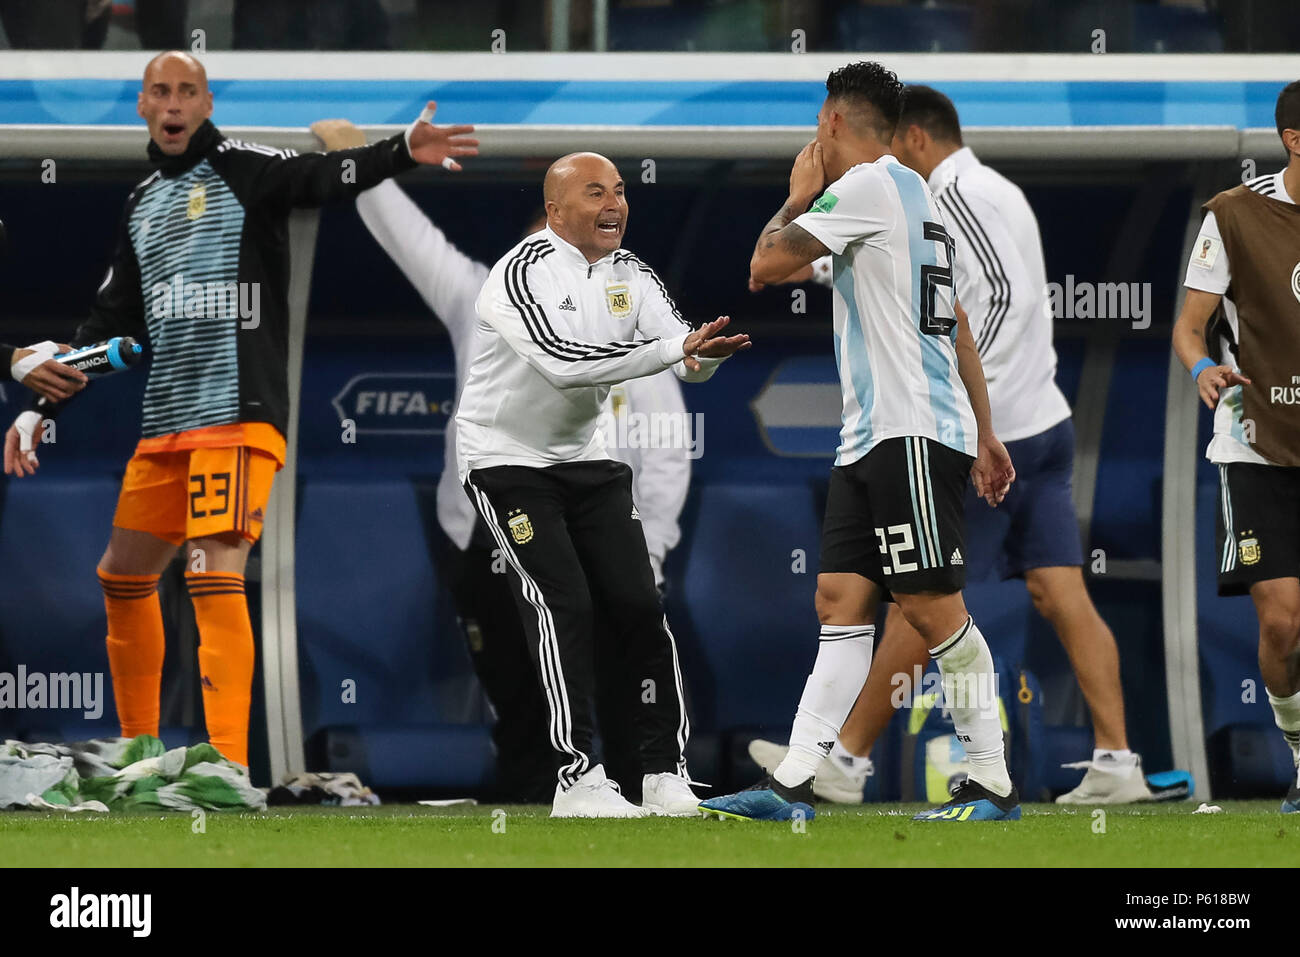 St Petersburg, Russia. 26th Jun, 2018. Cristian Pavon of Argentina speaks to Argentina Manager Jorge Sampaoli during the 2018 FIFA World Cup Group D match between Nigeria and Argentina at Saint Petersburg Stadium on June 26th 2018 in Saint Petersburg, Russia. (Photo by Daniel Chesterton/phcimages.com) Credit: PHC Images/Alamy Live News Stock Photo